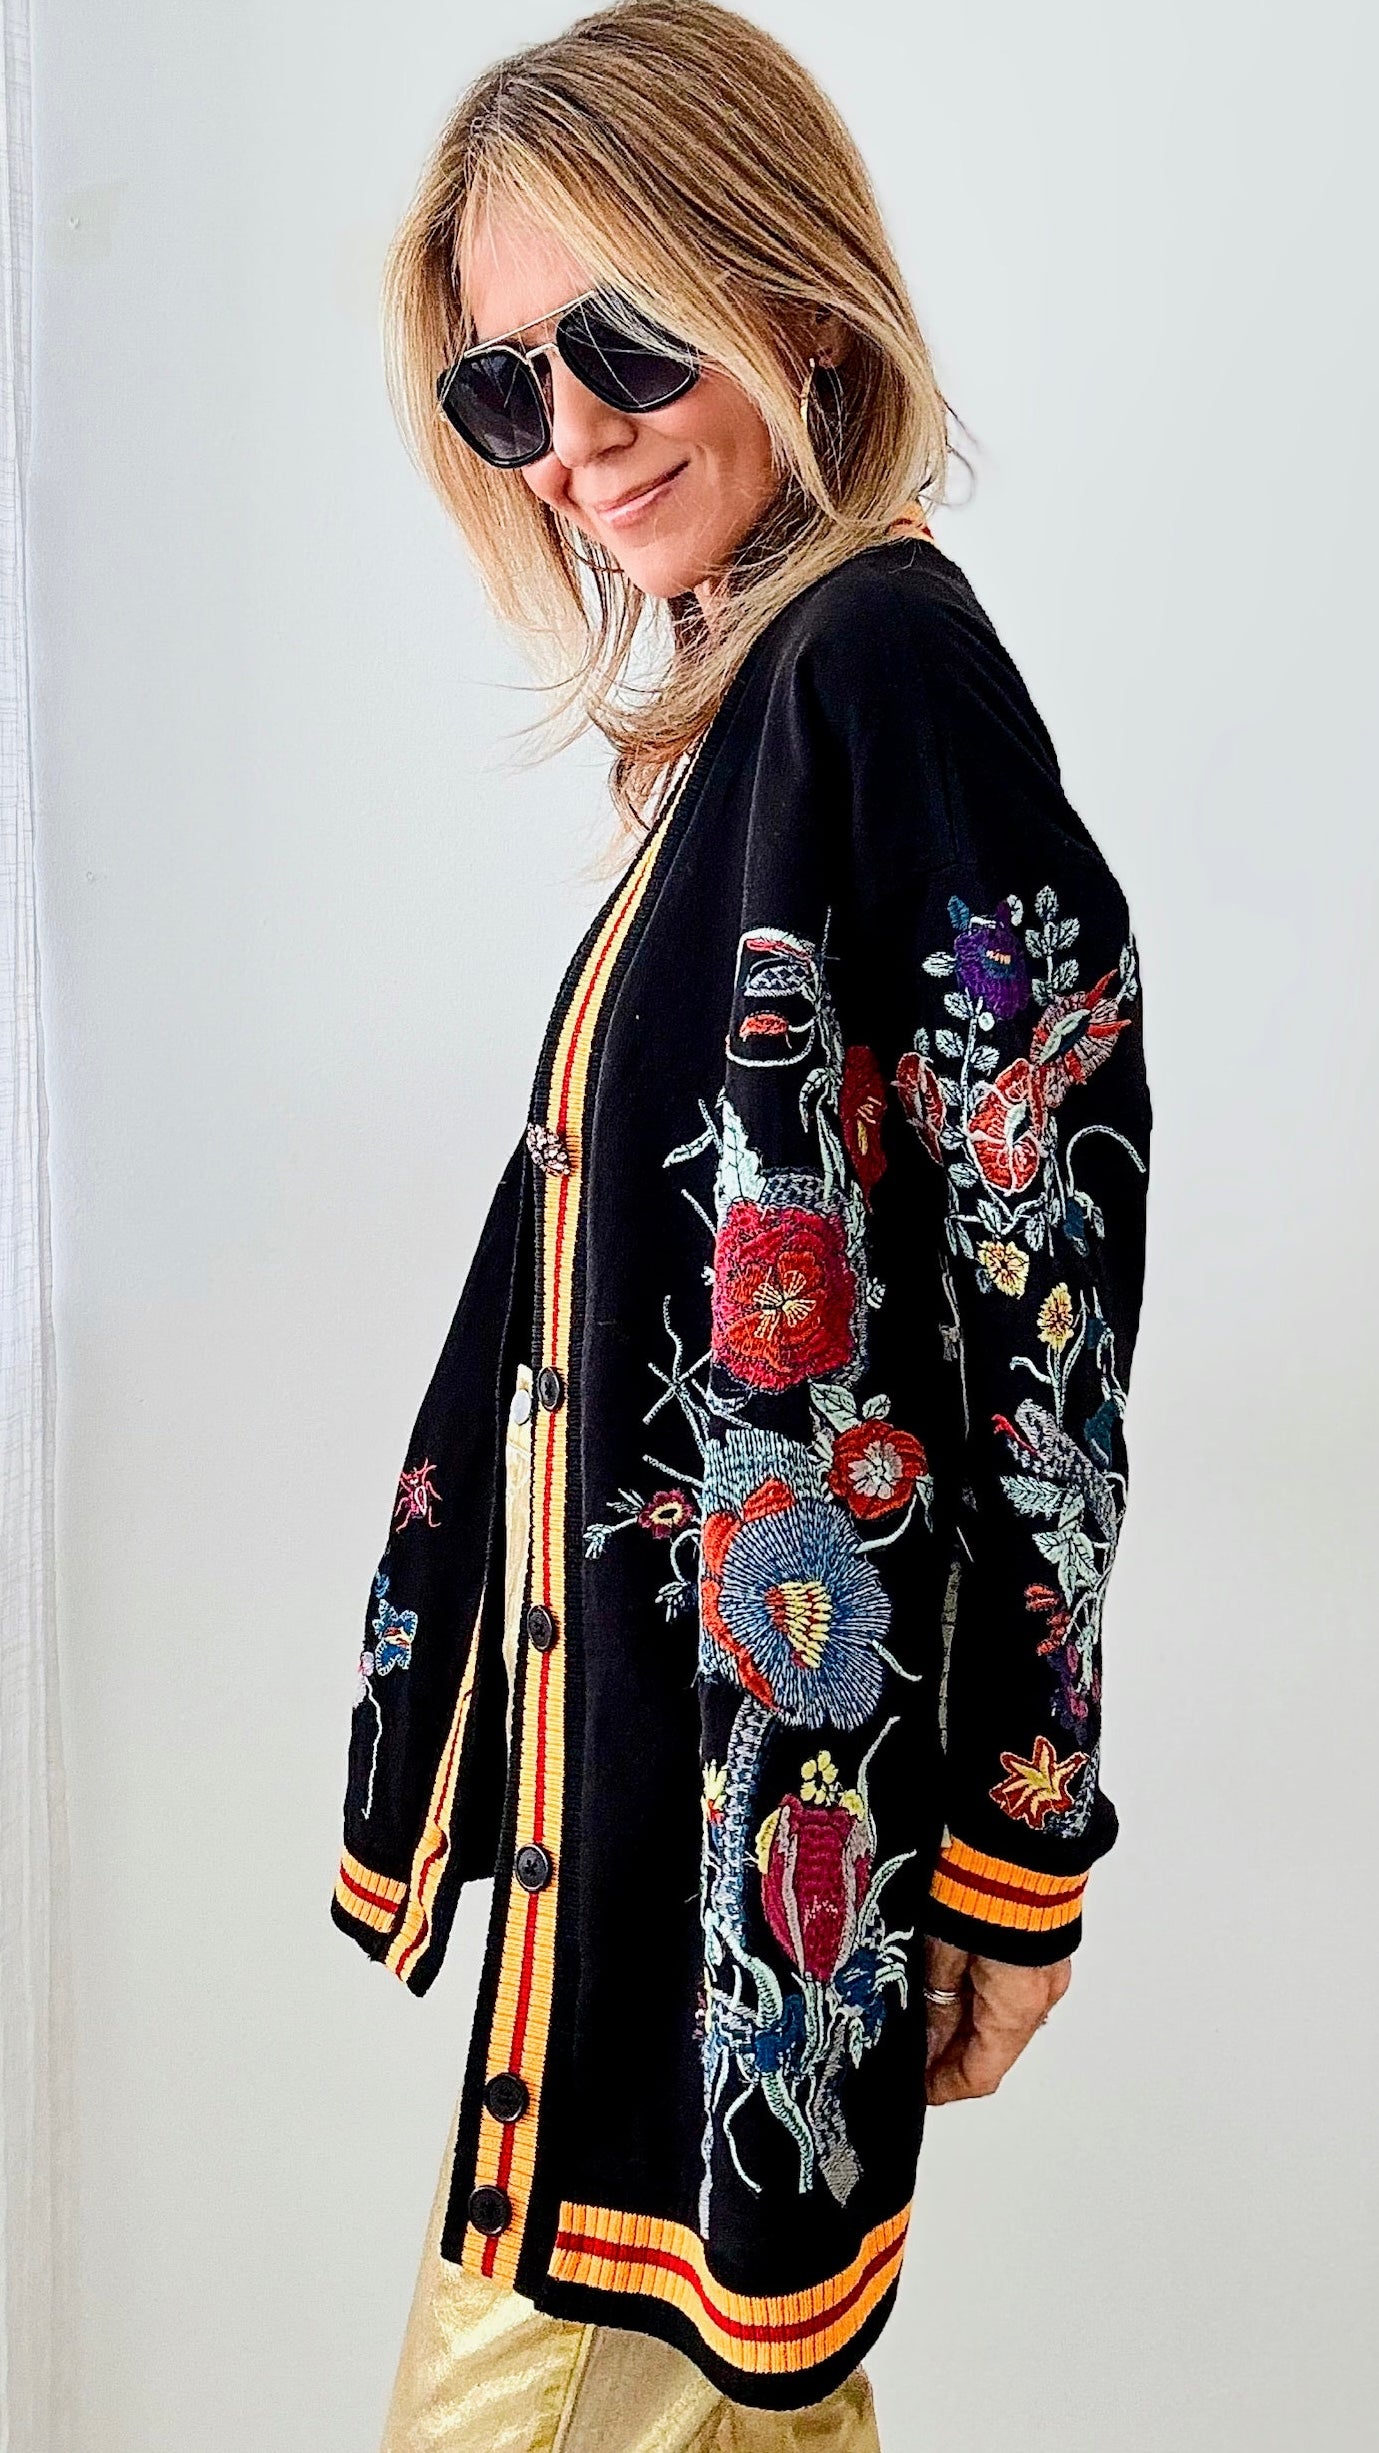 Magical Night Cardigan - Black-150 Cardigans/Layers-Aratta-Coastal Bloom Boutique, find the trendiest versions of the popular styles and looks Located in Indialantic, FL